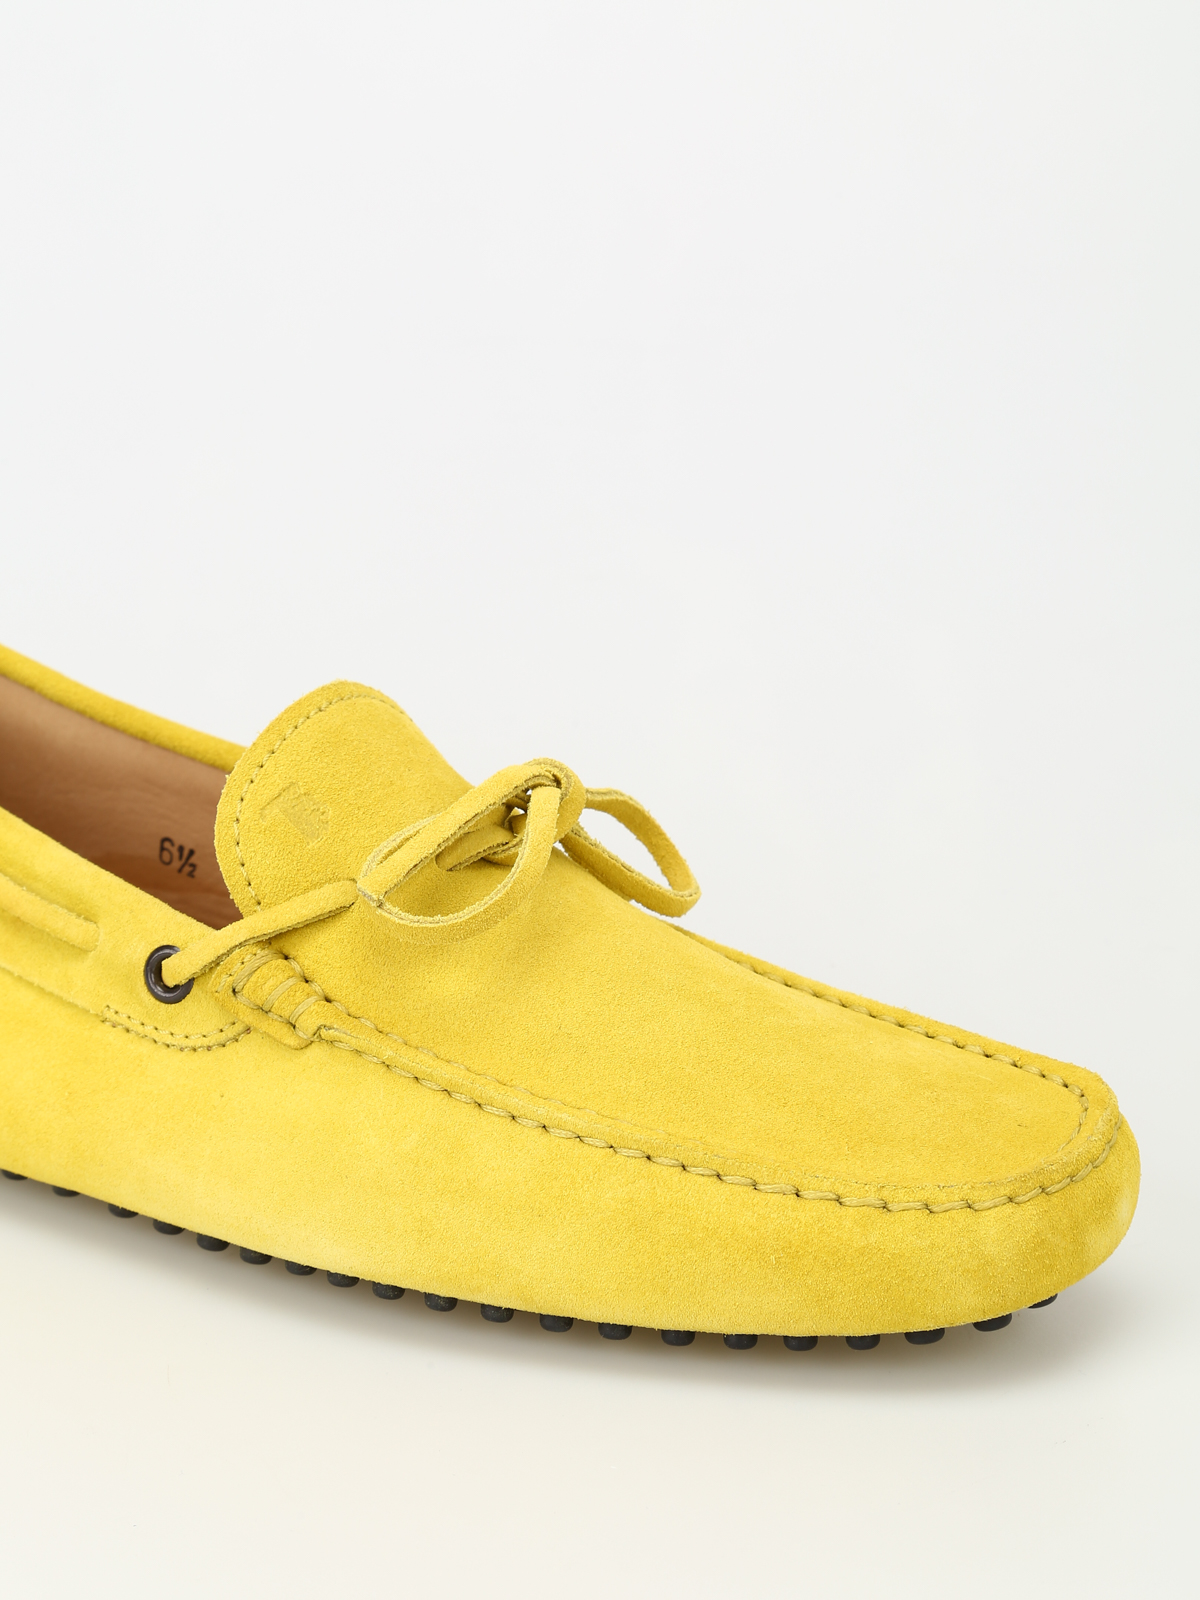 tod's yellow loafers